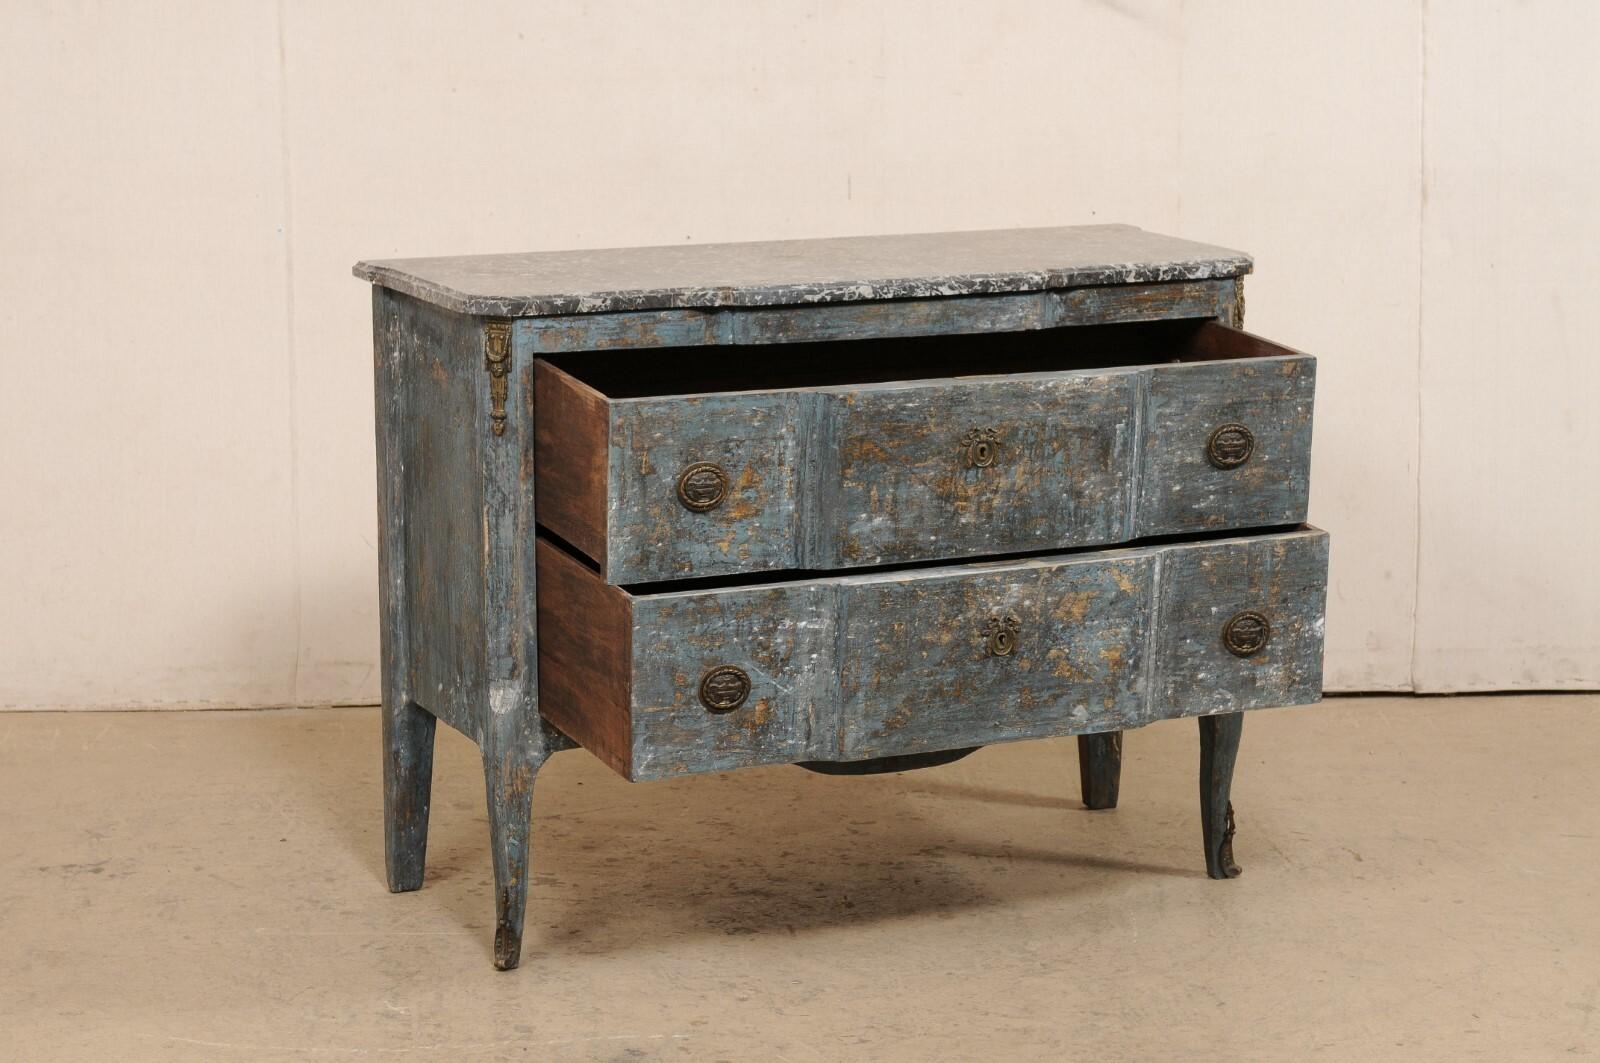 Antique French Neoclassical Style Commode w/Black Marble Top & Scraped Finish For Sale 1